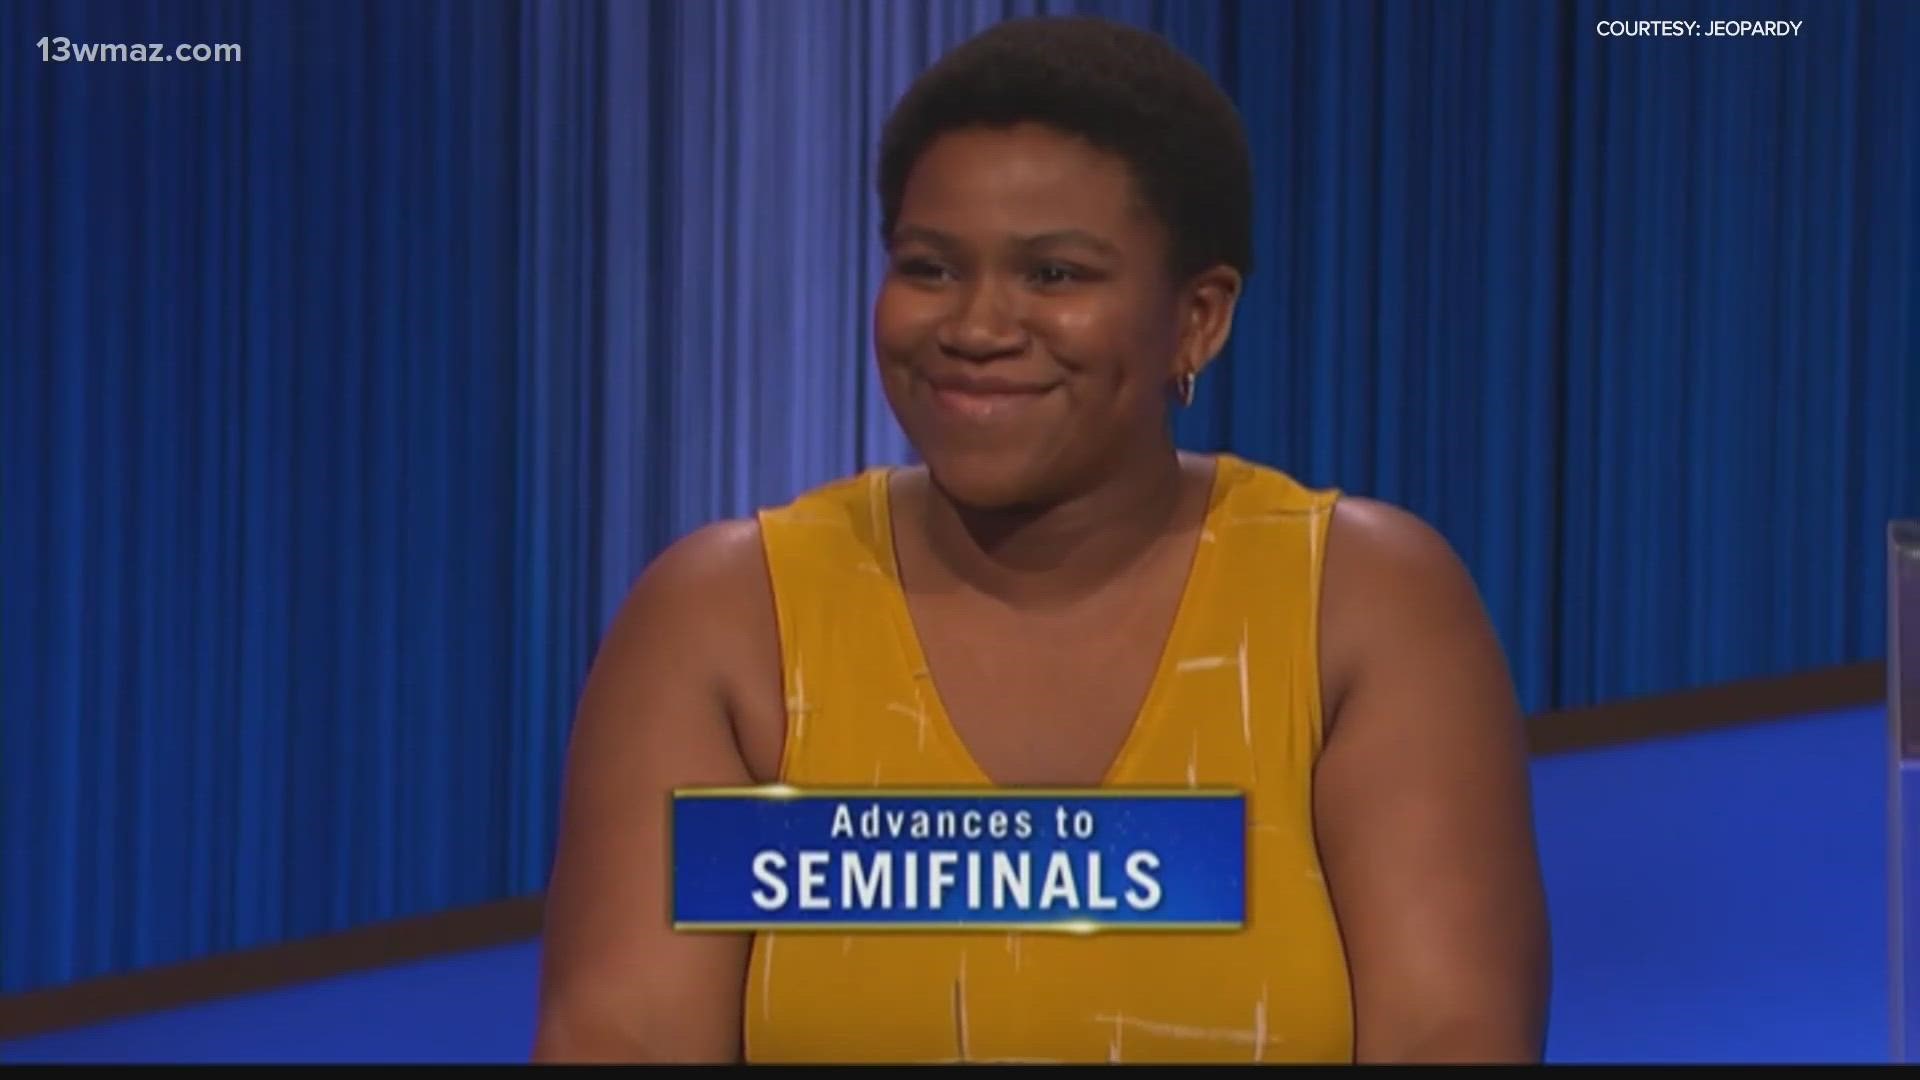 She won by $2 and will now advance to the semifinals of the tournament.